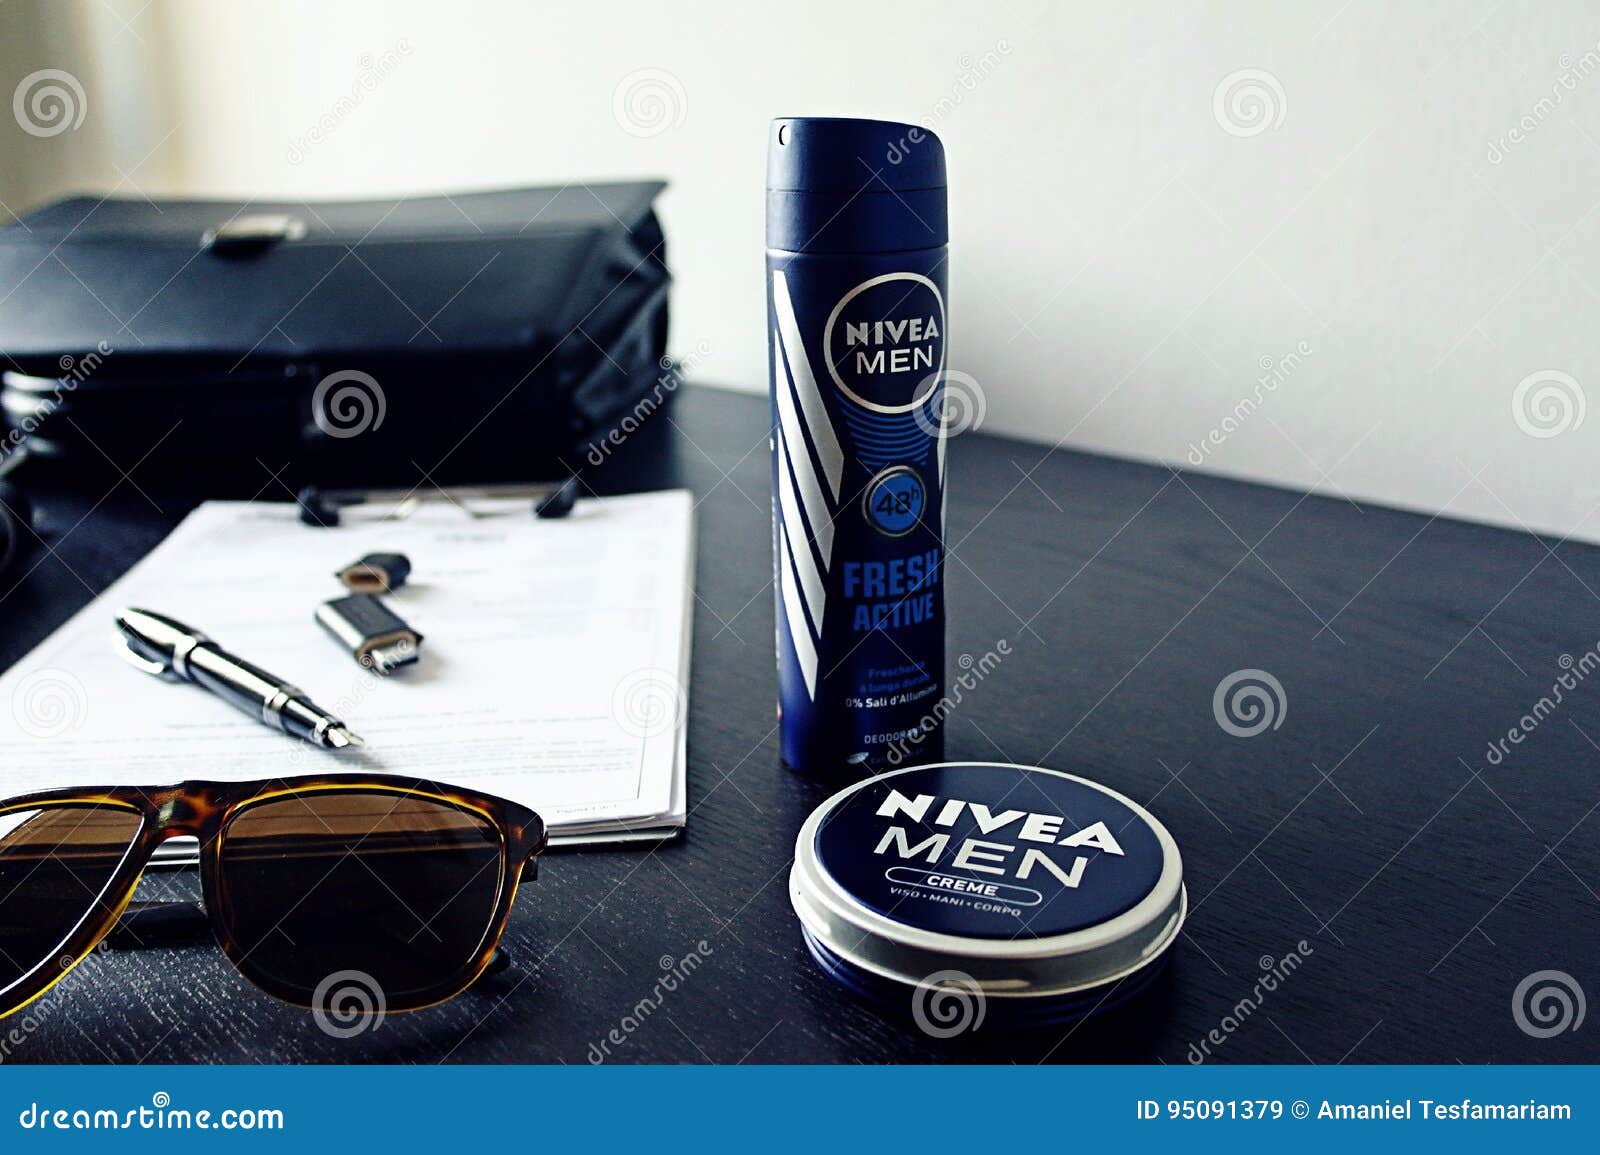 Nivea Men Products On A Desk Editorial Stock Image Image Of